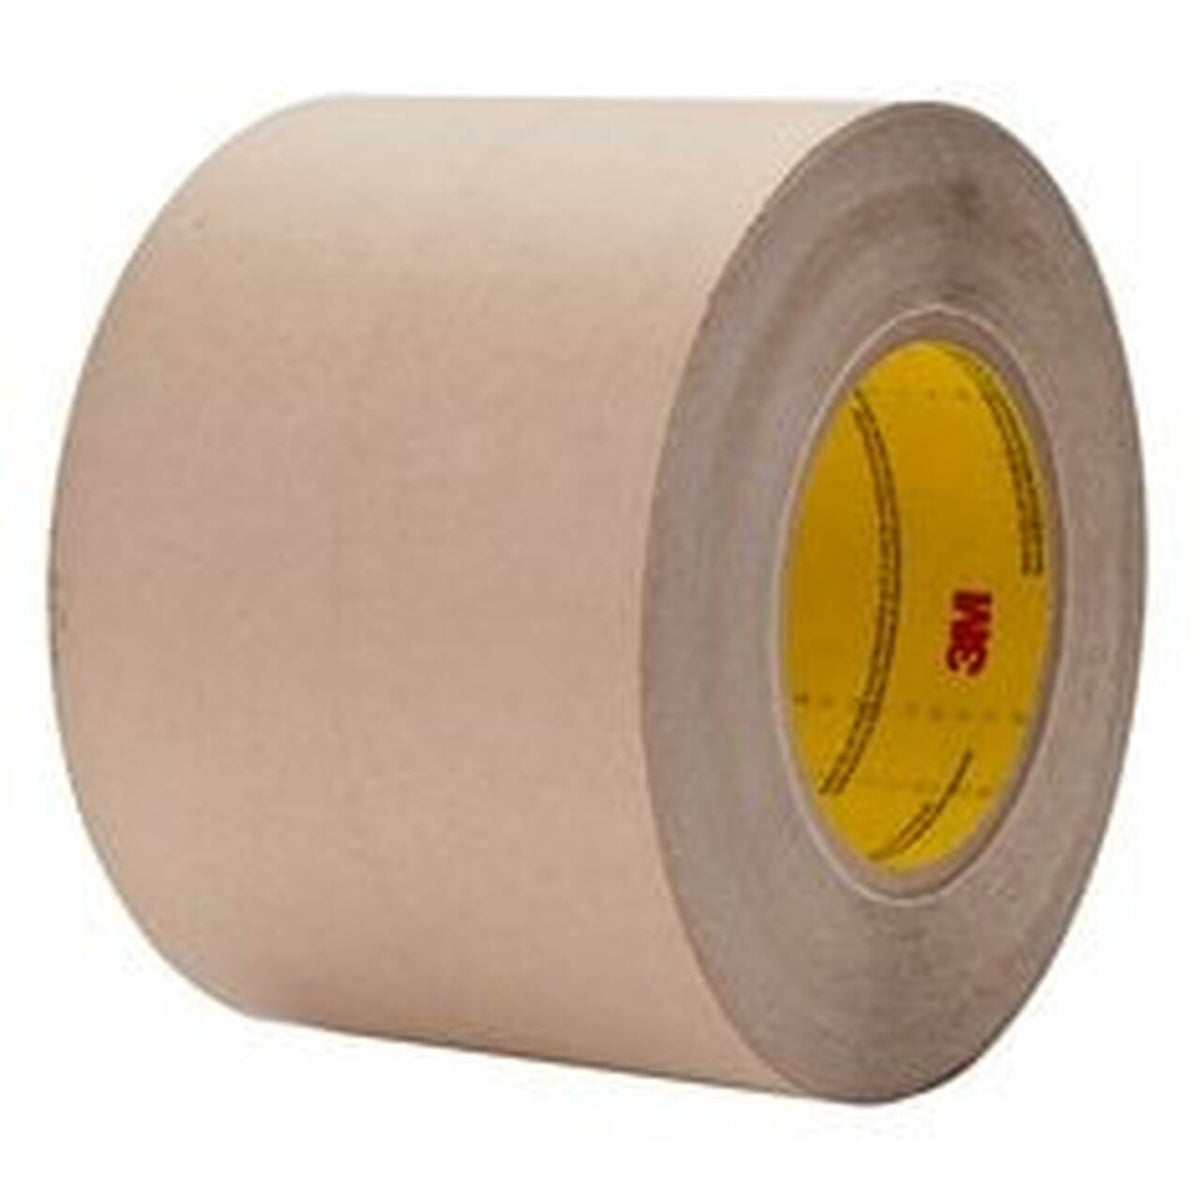 3M Marine Qualifies for Free Shipping 3M All Weather Flashing Tape 8067 Tan 4" x 75' Slit Liner #7000001346